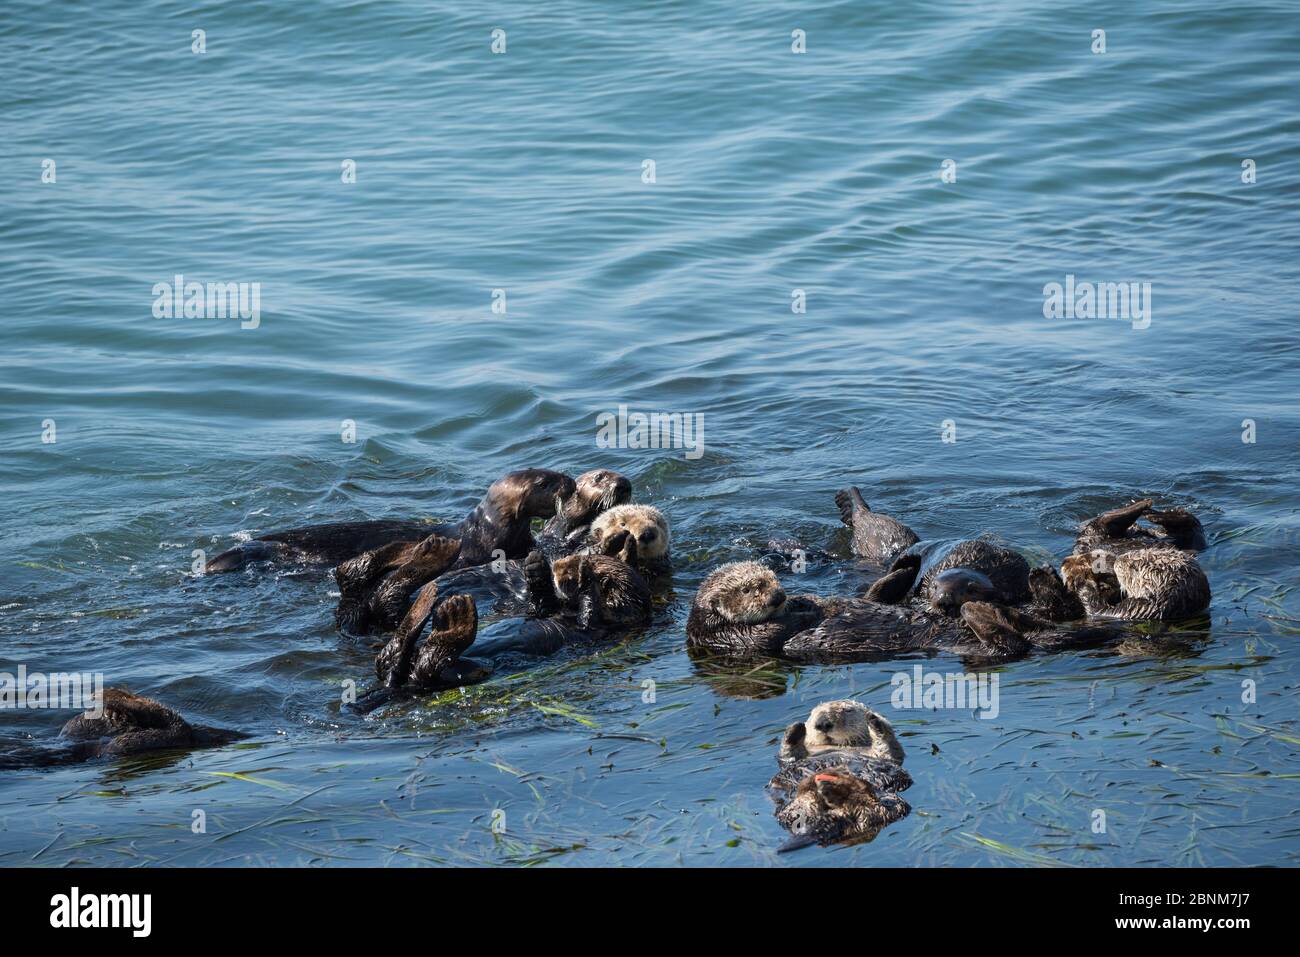 Group of California sea otters (Enhydra lutris nereis) resting in a raft at the edge of a bed of Eel grass (Zostera) Morro Bay, California, USA, June. Stock Photo